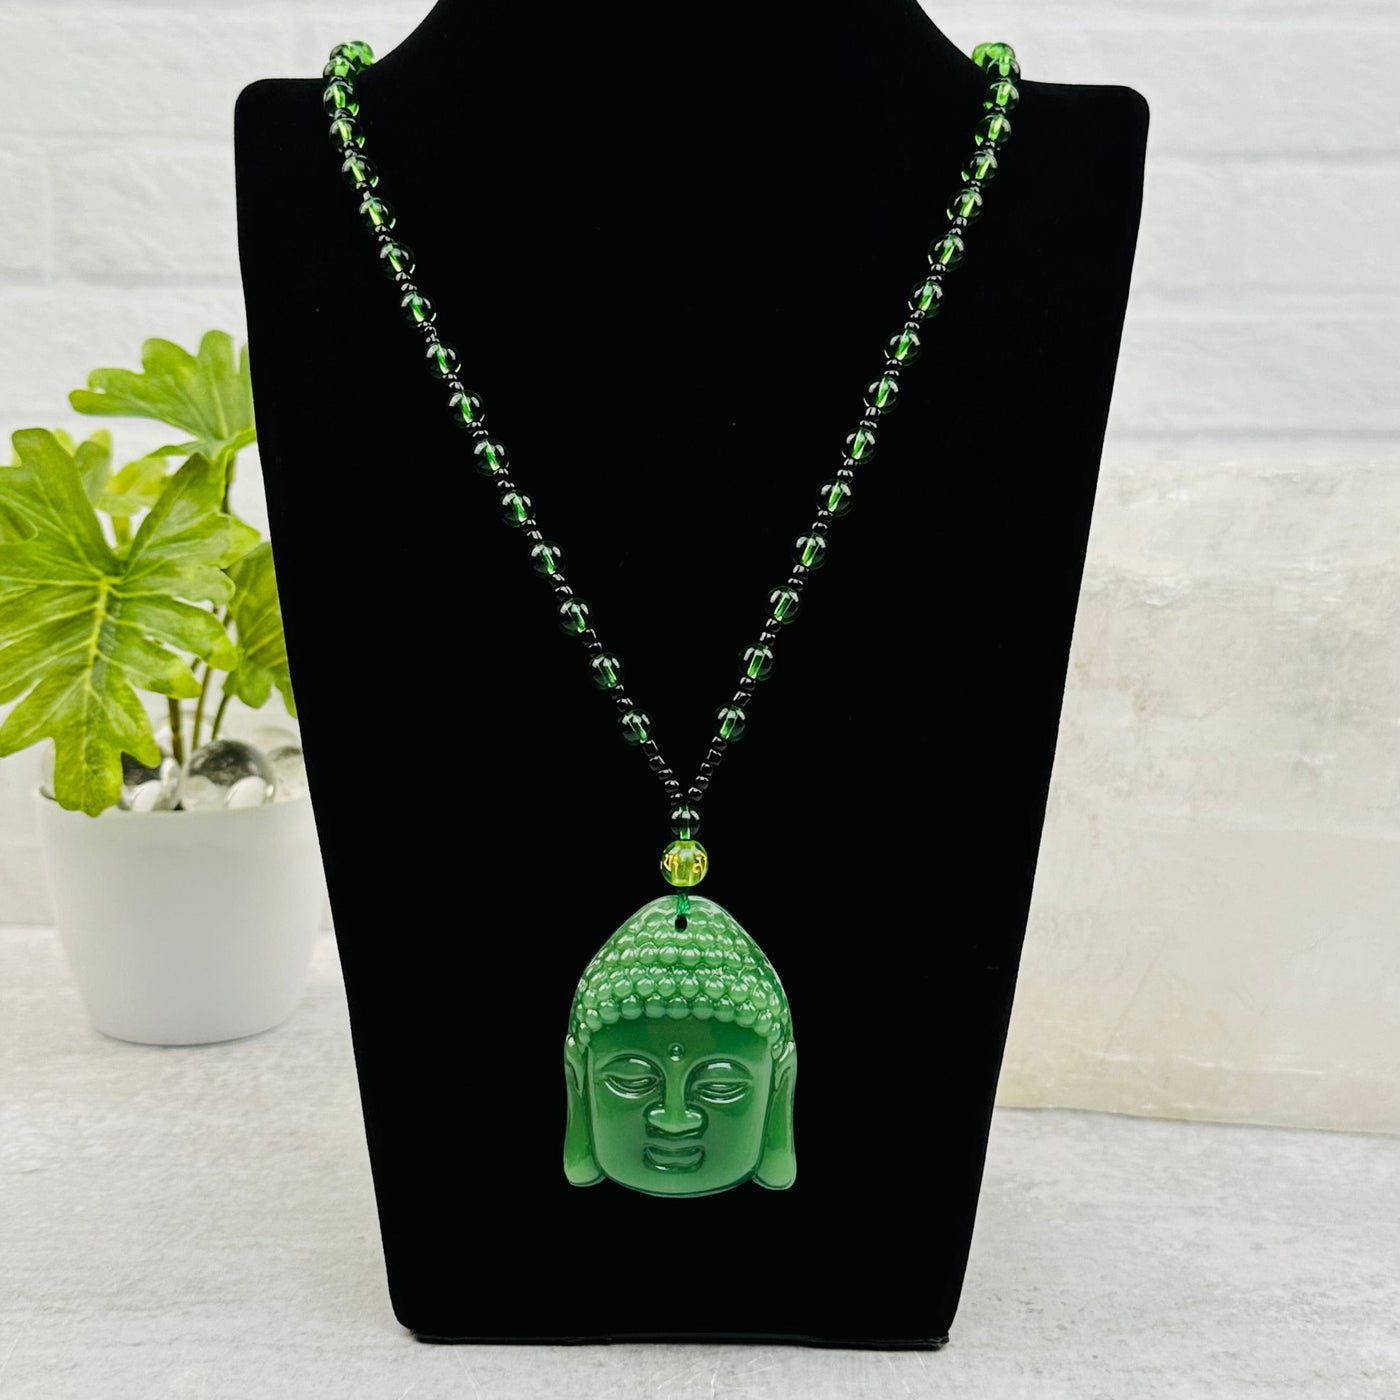 Carved Gemstone Buddha Head Mala Necklace available in aventurine